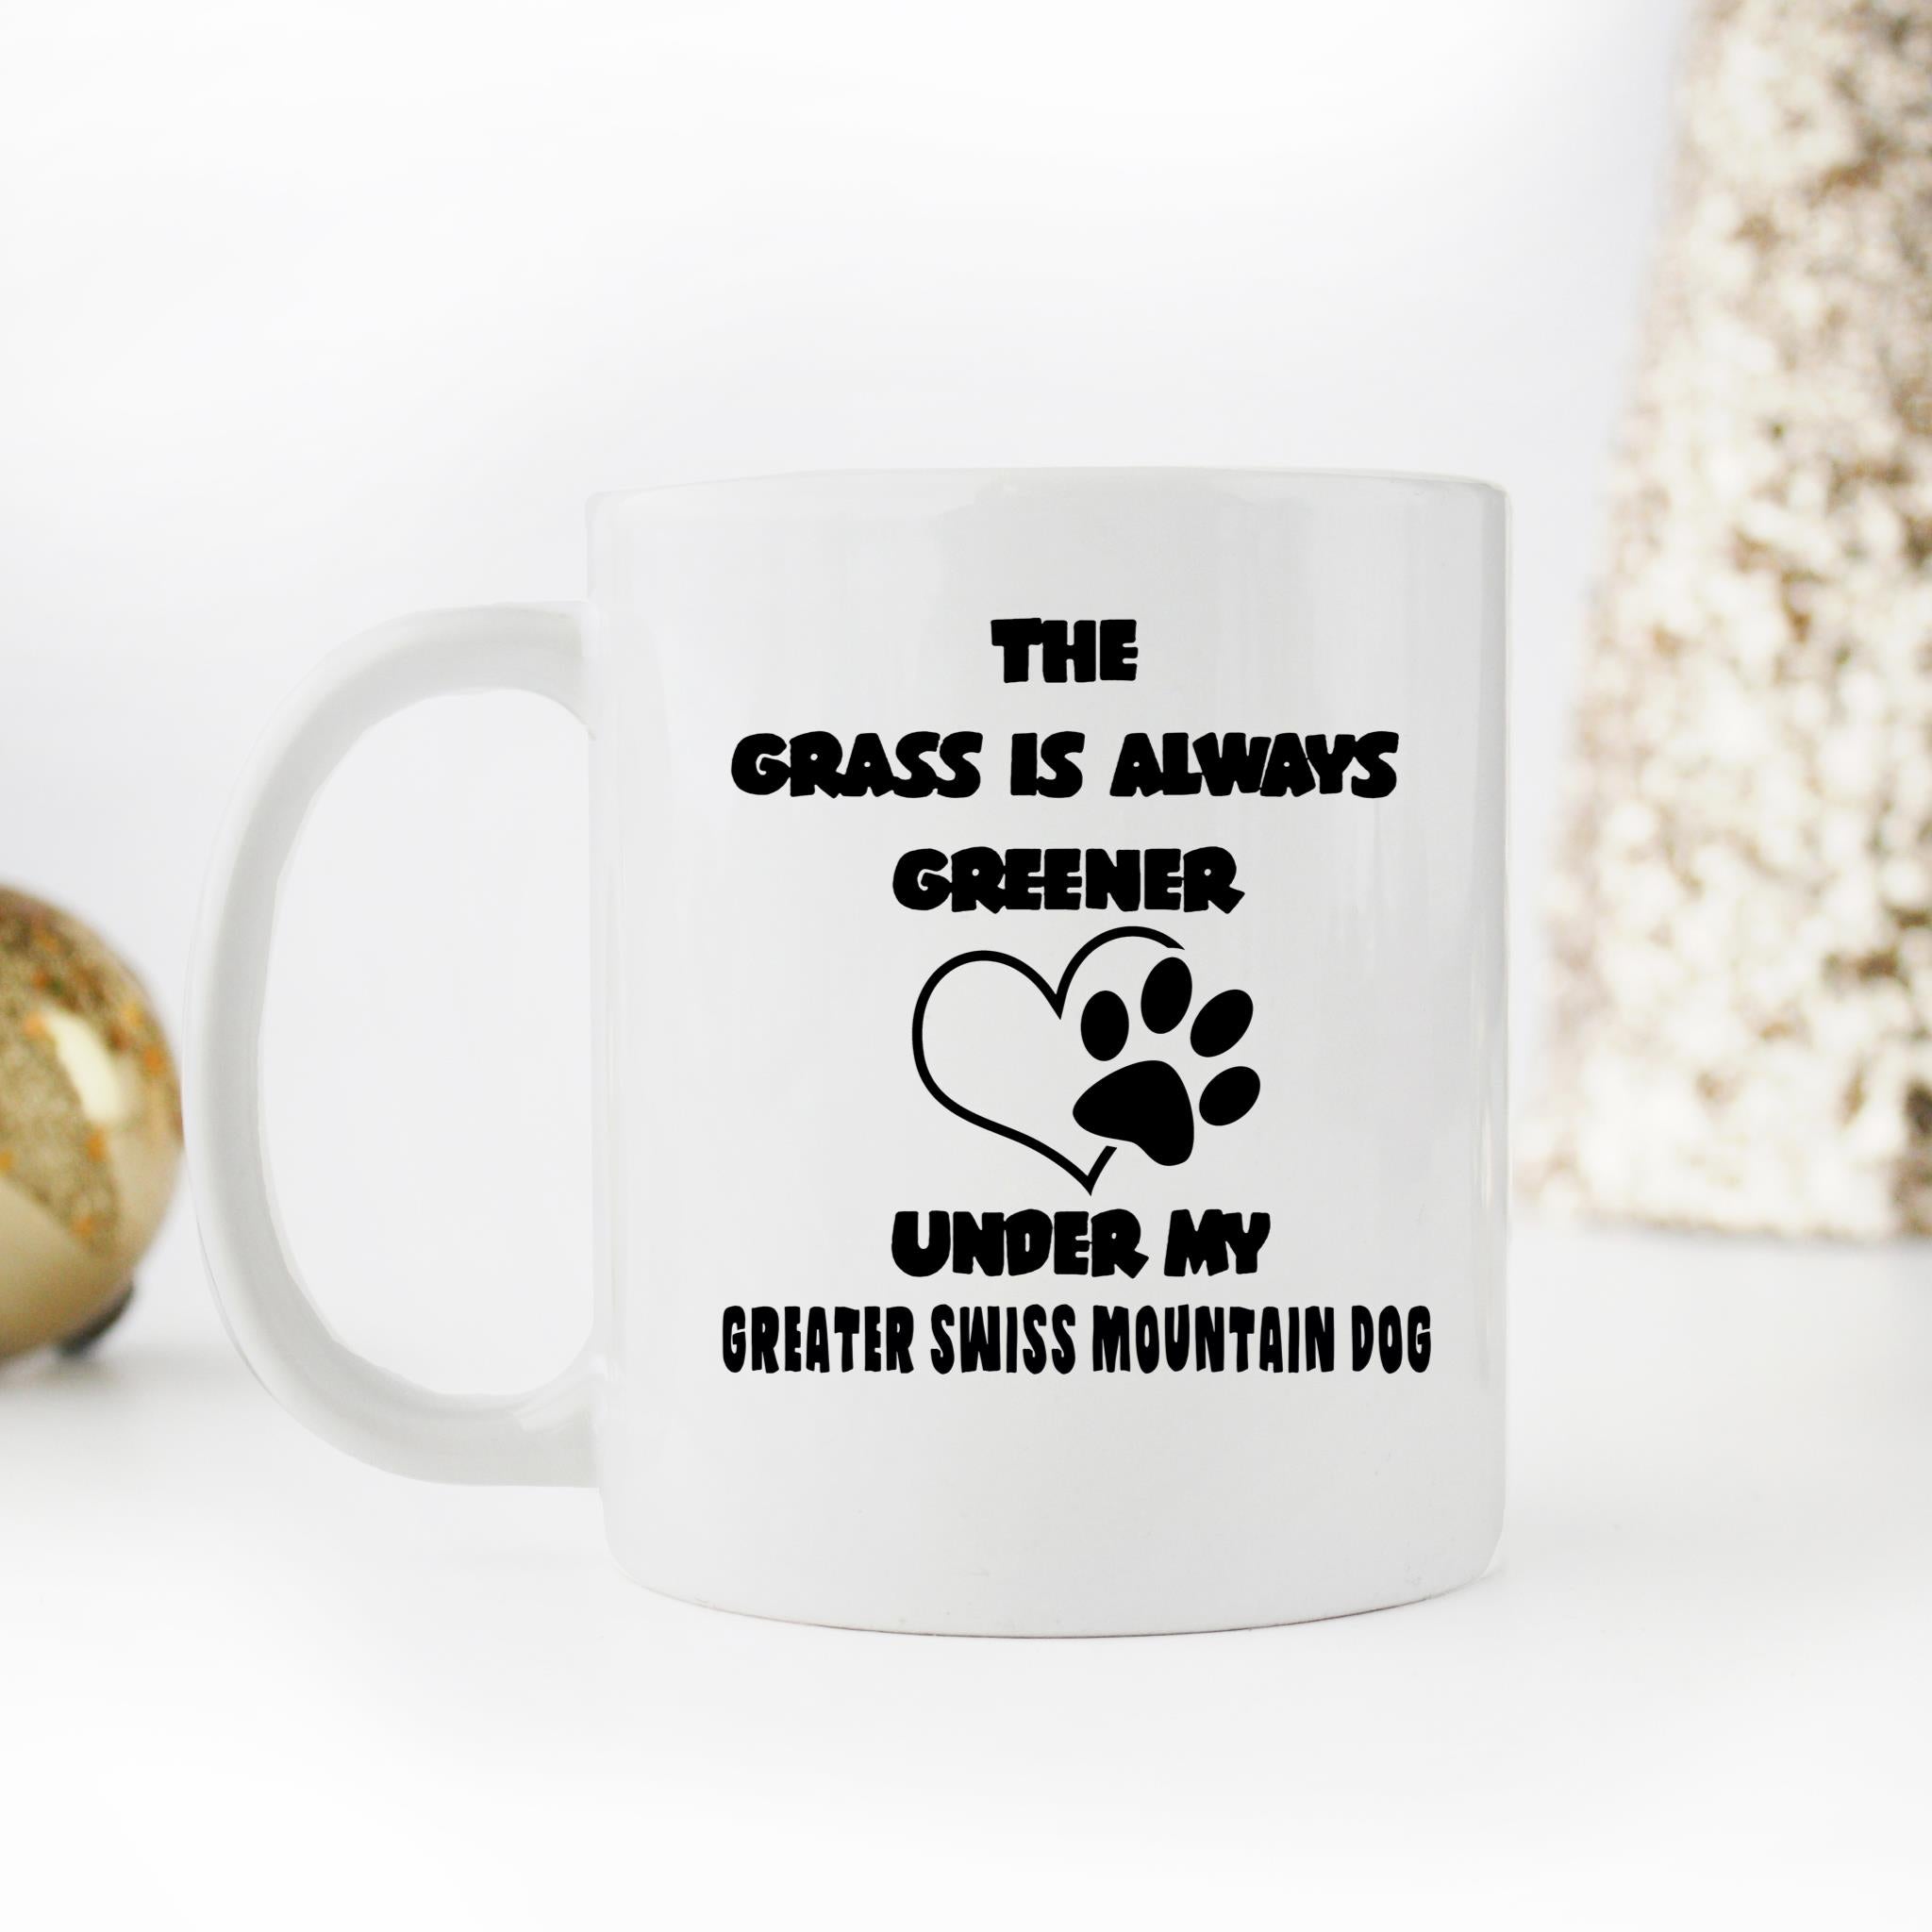 Skitons Funny Ceramic Novelty Coffee Mug The Grass Is Always Greener Under My Greater Swiss Mountain Dog Dog Funny Sarcastic, Dog Lover v7P5OPY